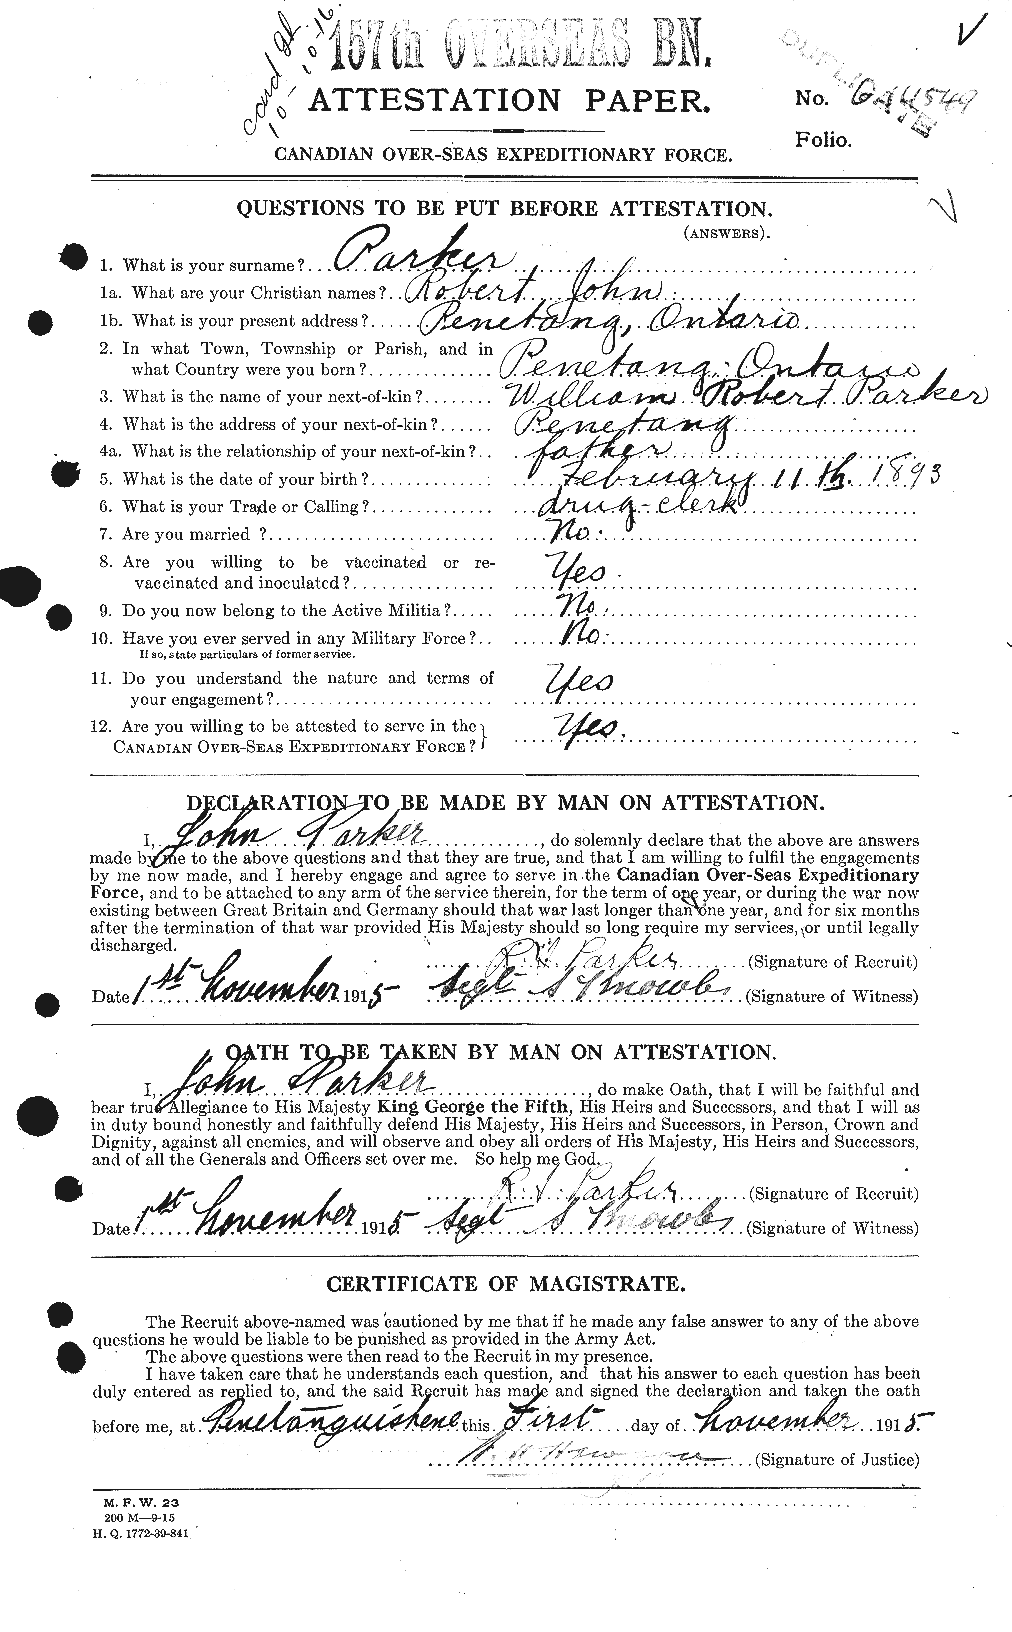 Personnel Records of the First World War - CEF 565606a